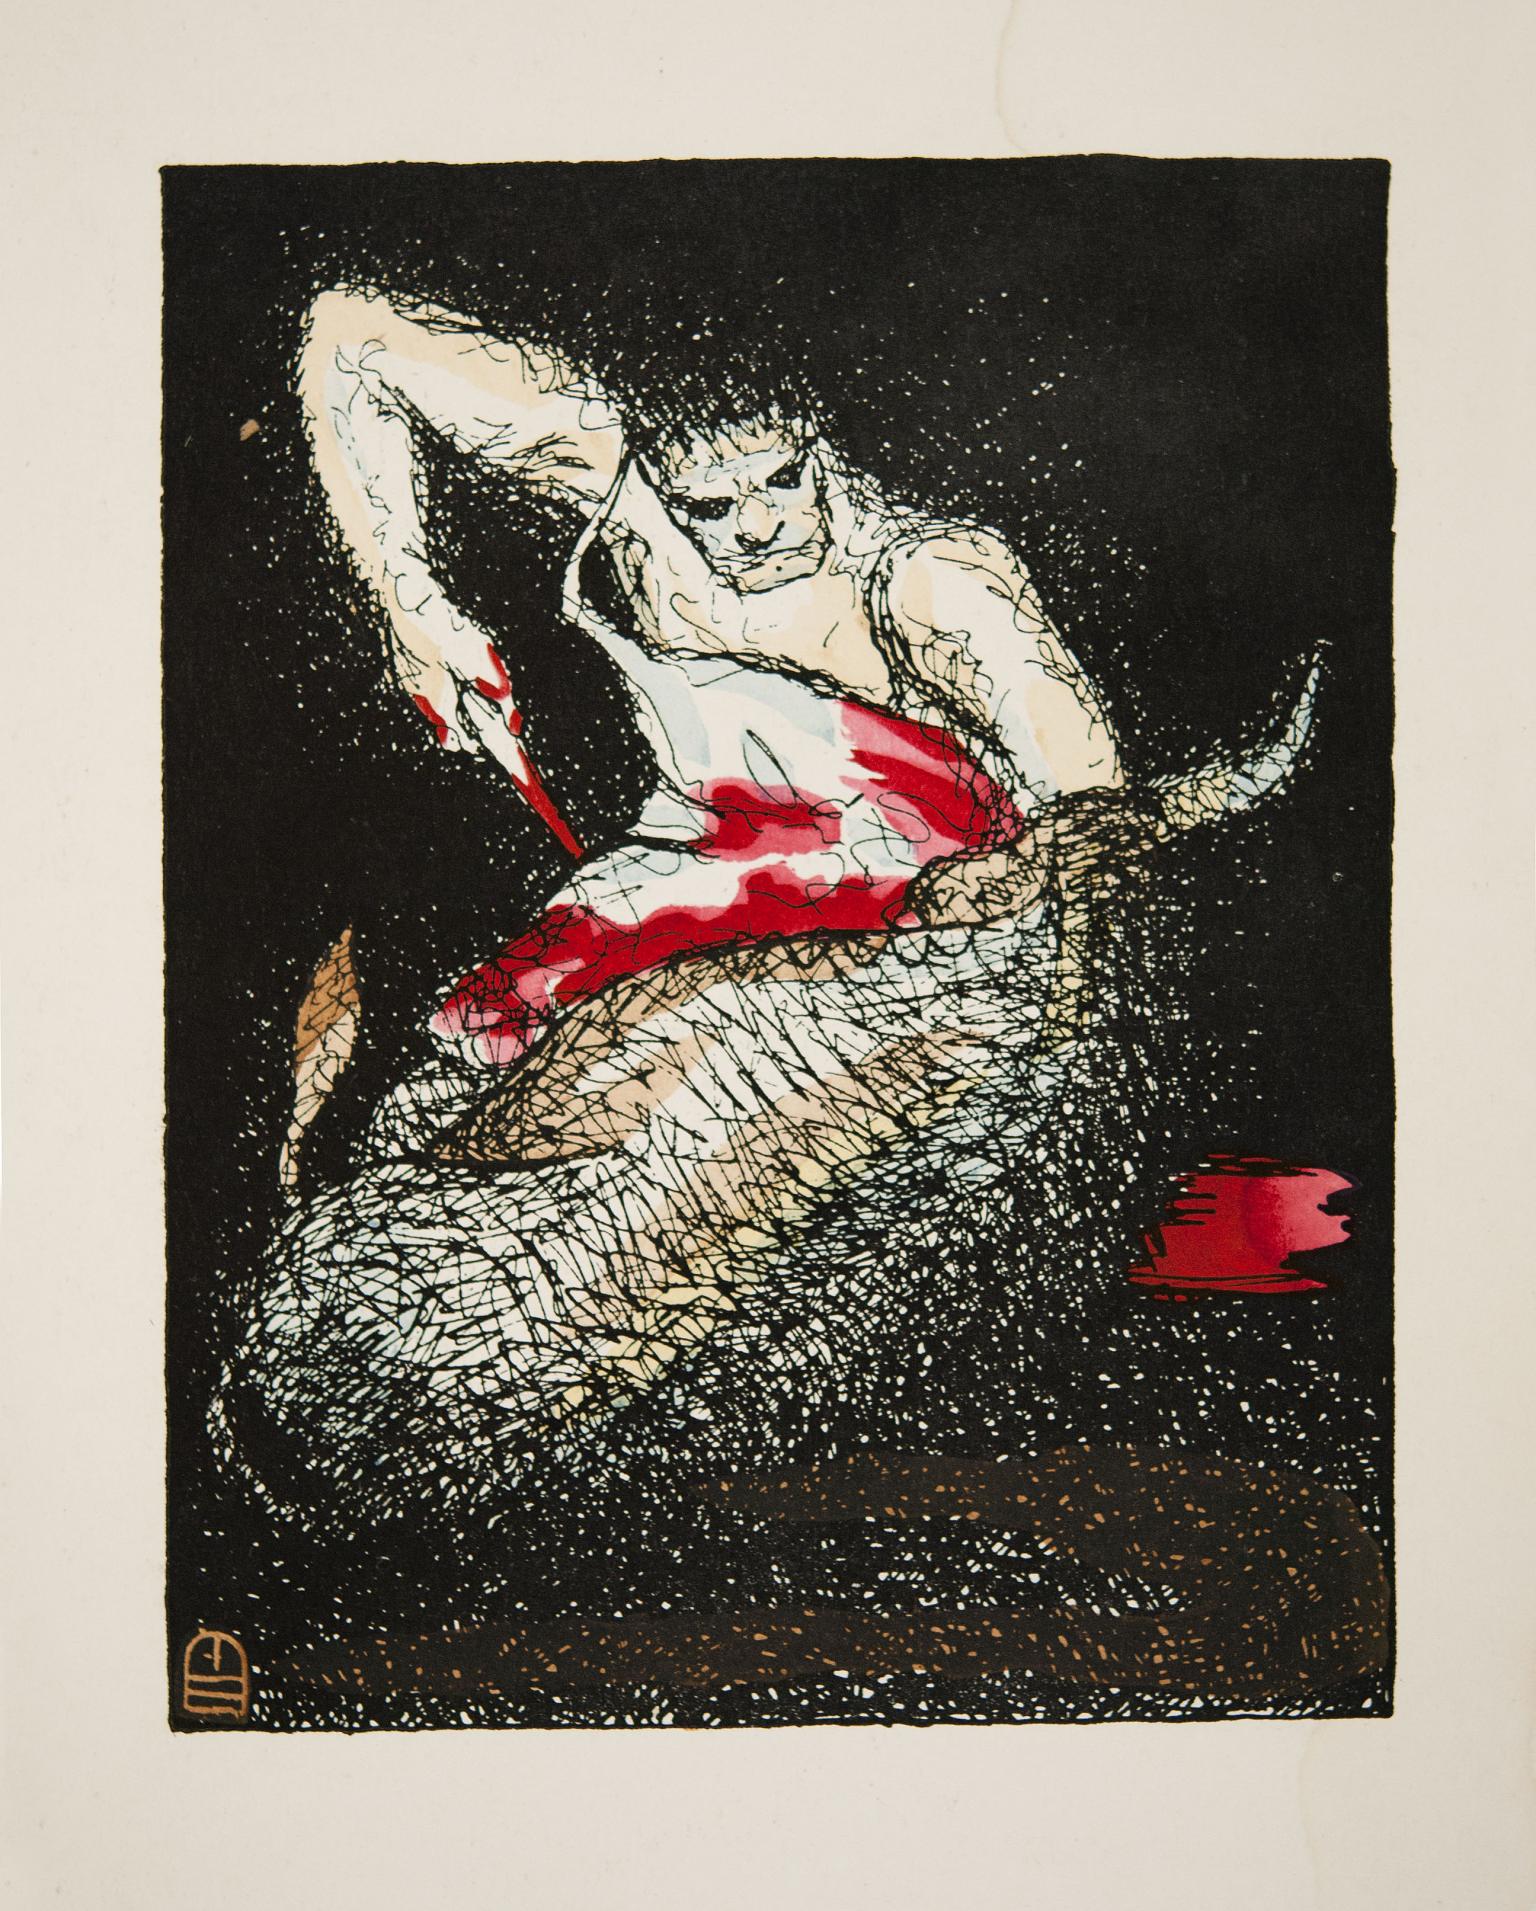 Illustration of man in a bloody apron holding a bloody knife as he begins to slaughter a large animal.